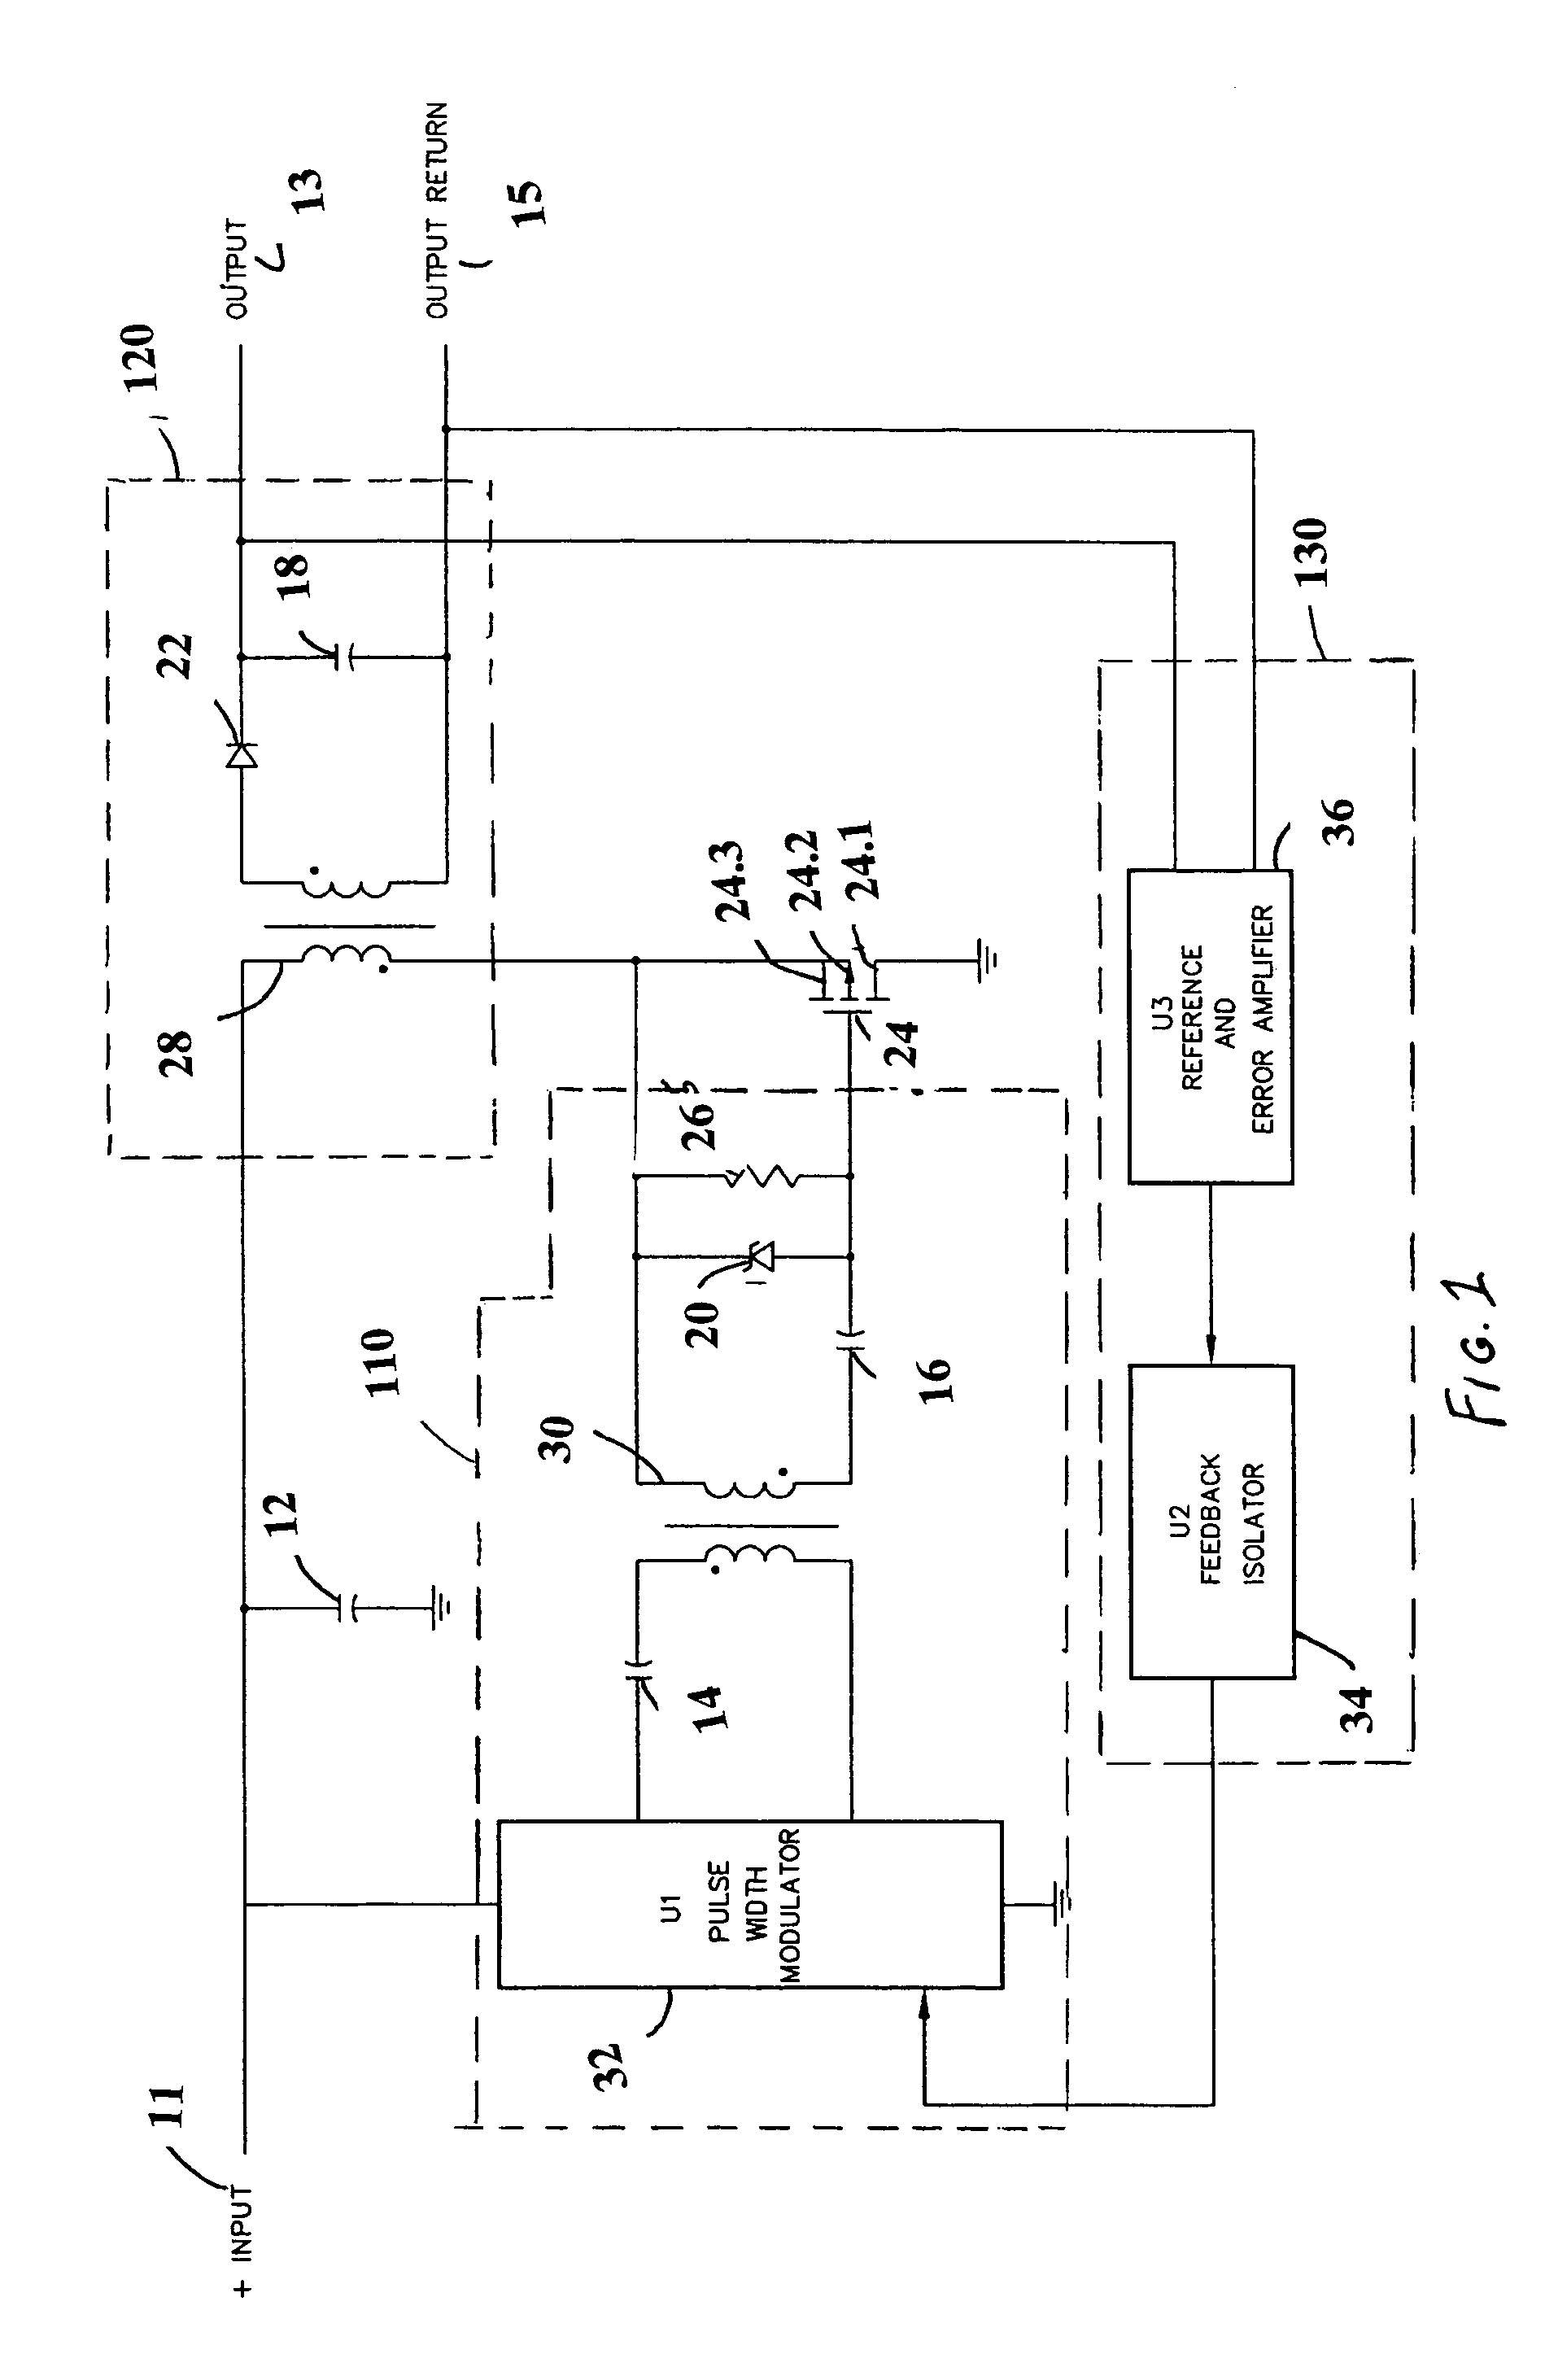 Radiation tolerant electrical component with non-radiation hardened FET